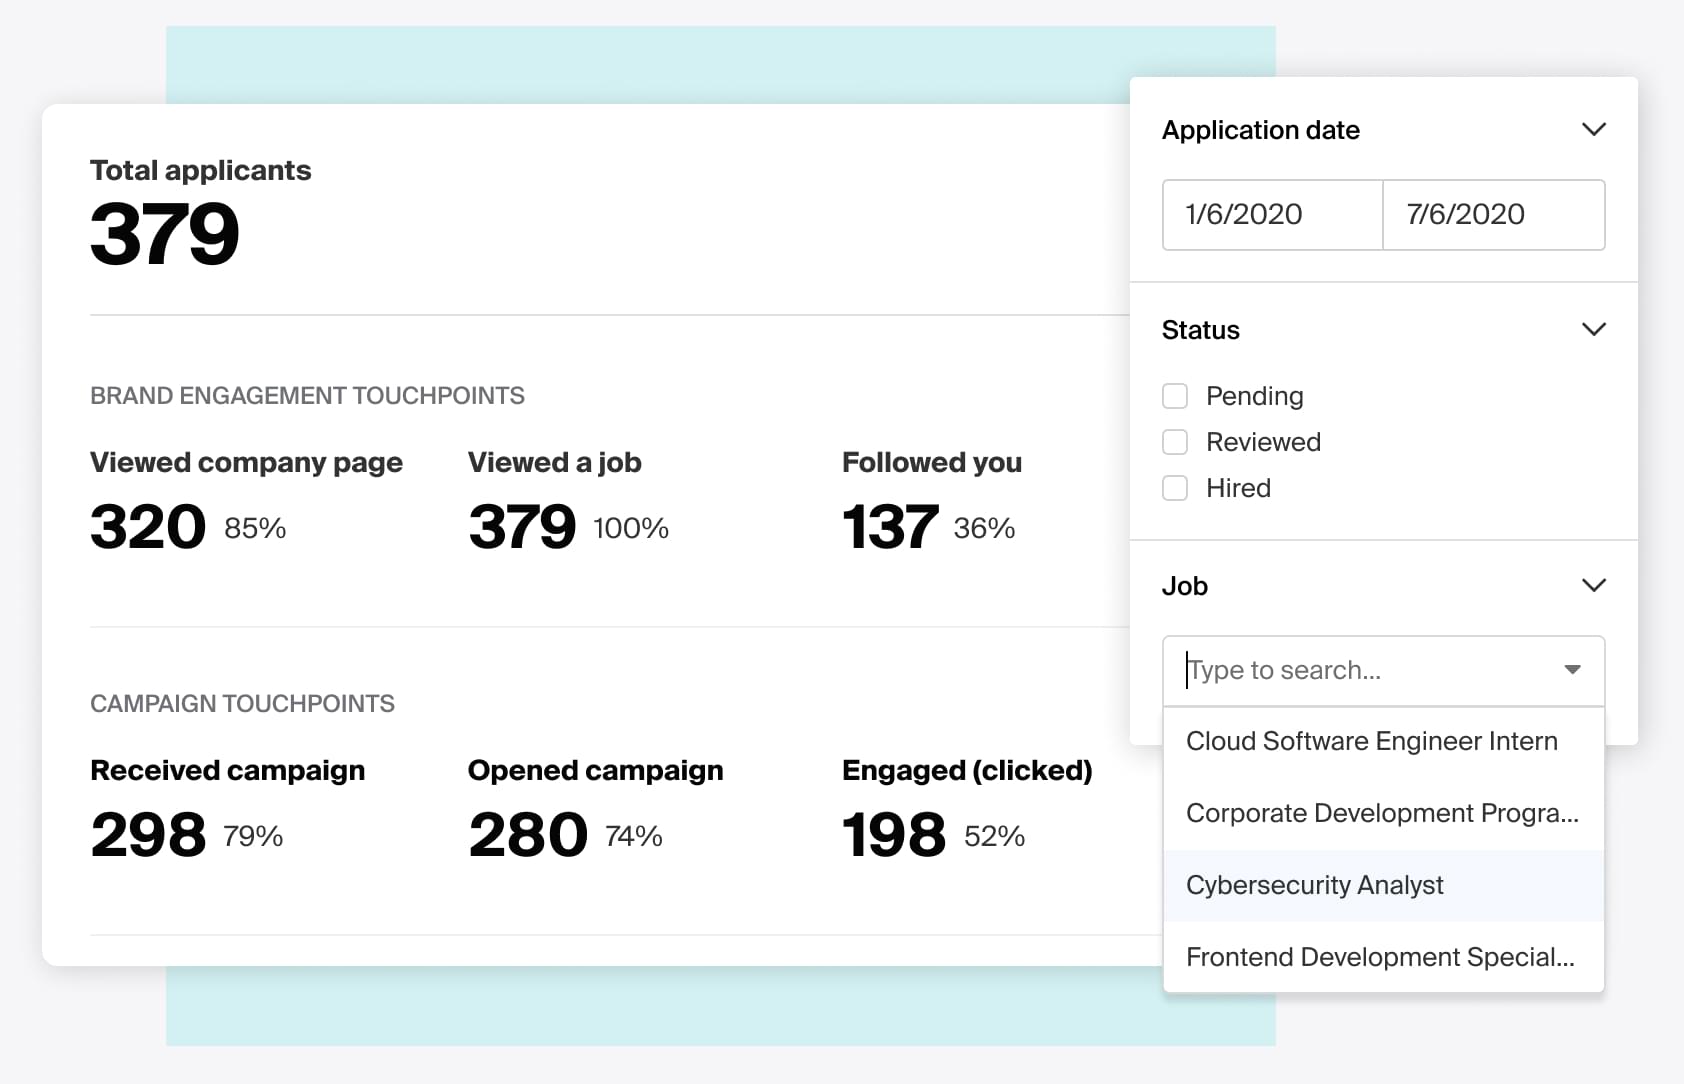 Optimize your recruiting activities with event and funnel analytics